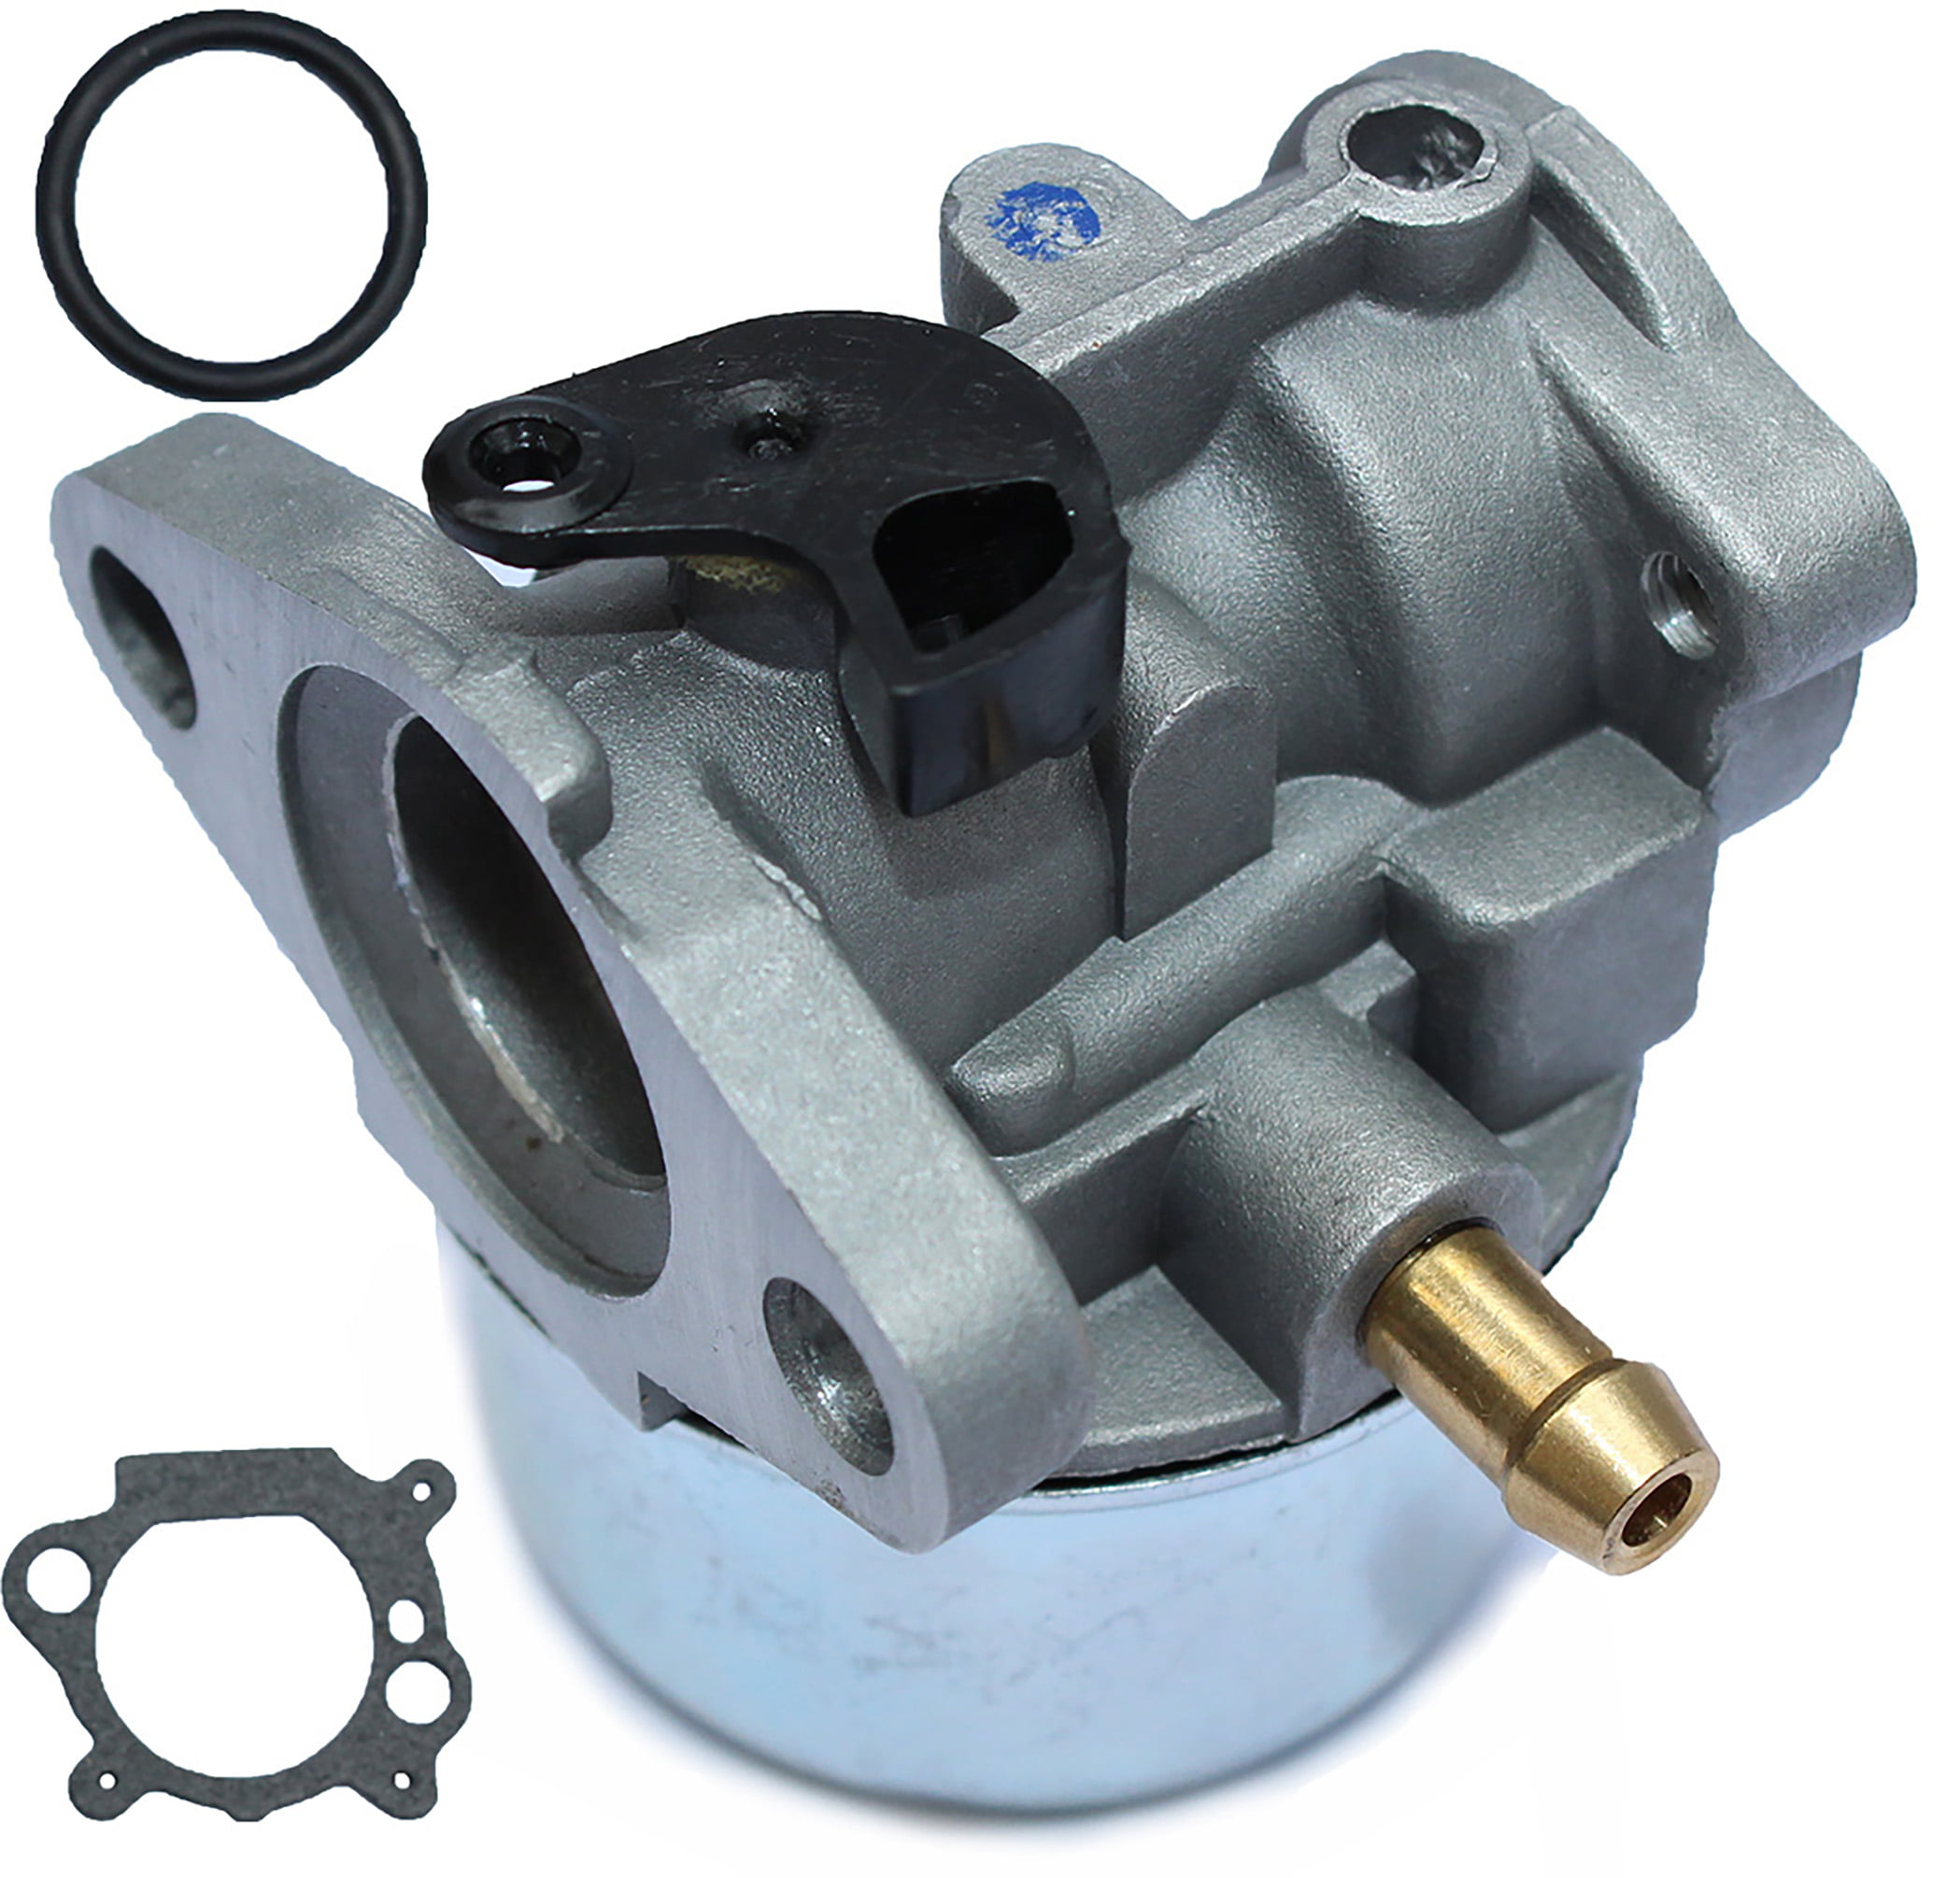 Details about   Carburetor Fits For Briggs & Stratton 799868 498170 497586 498254 497314 50-657 